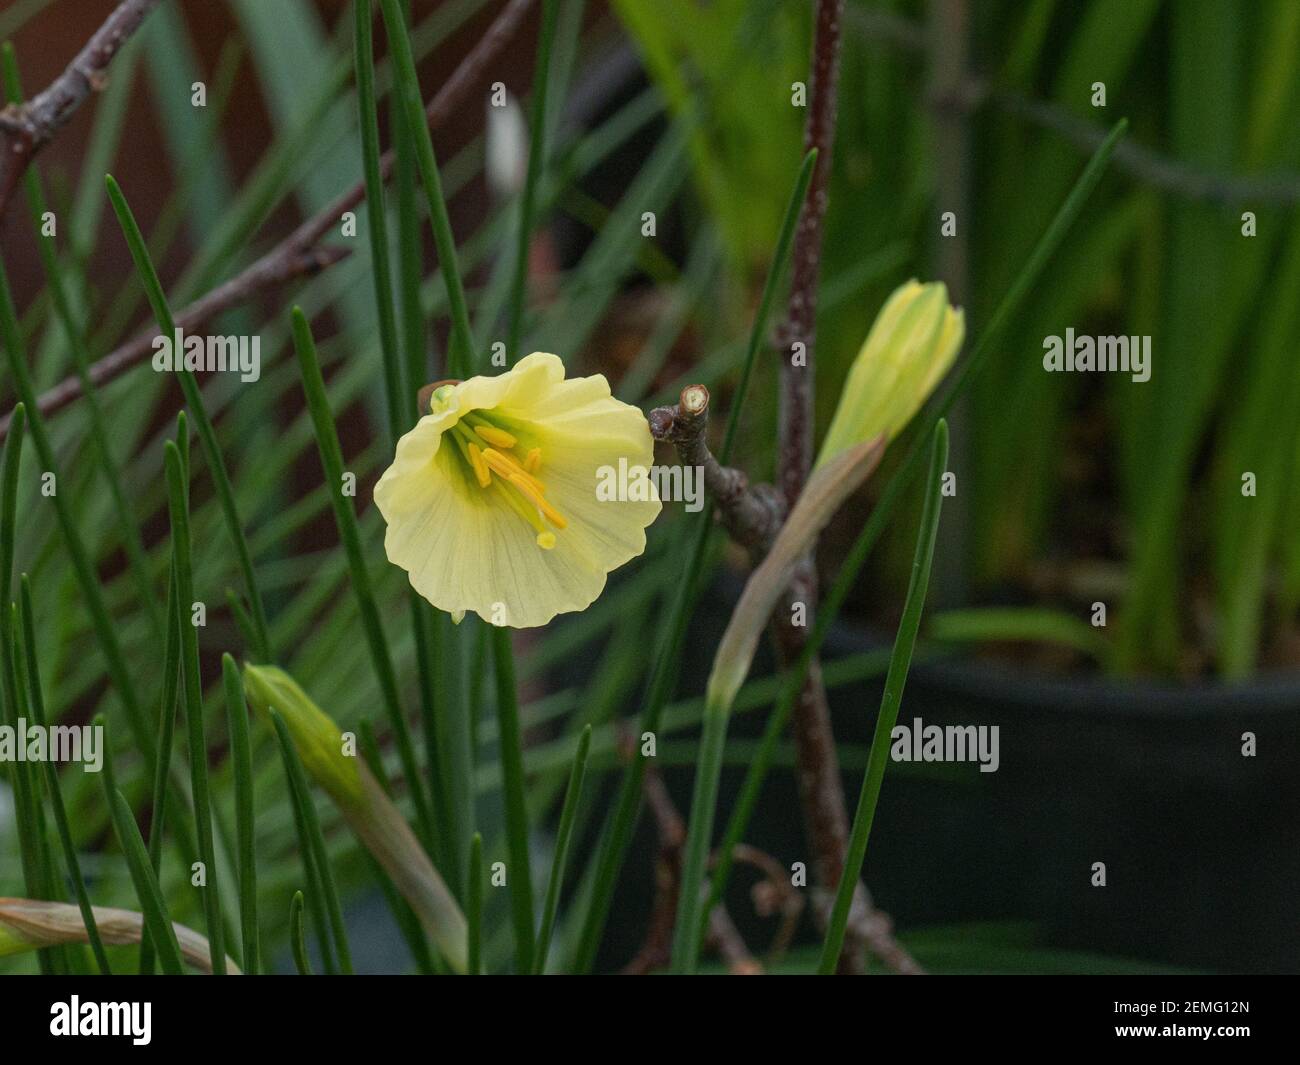 A close up of a single pale yellow flower of the dwarf daffodil Narcissus bulbocodium Artic Bells Stock Photo